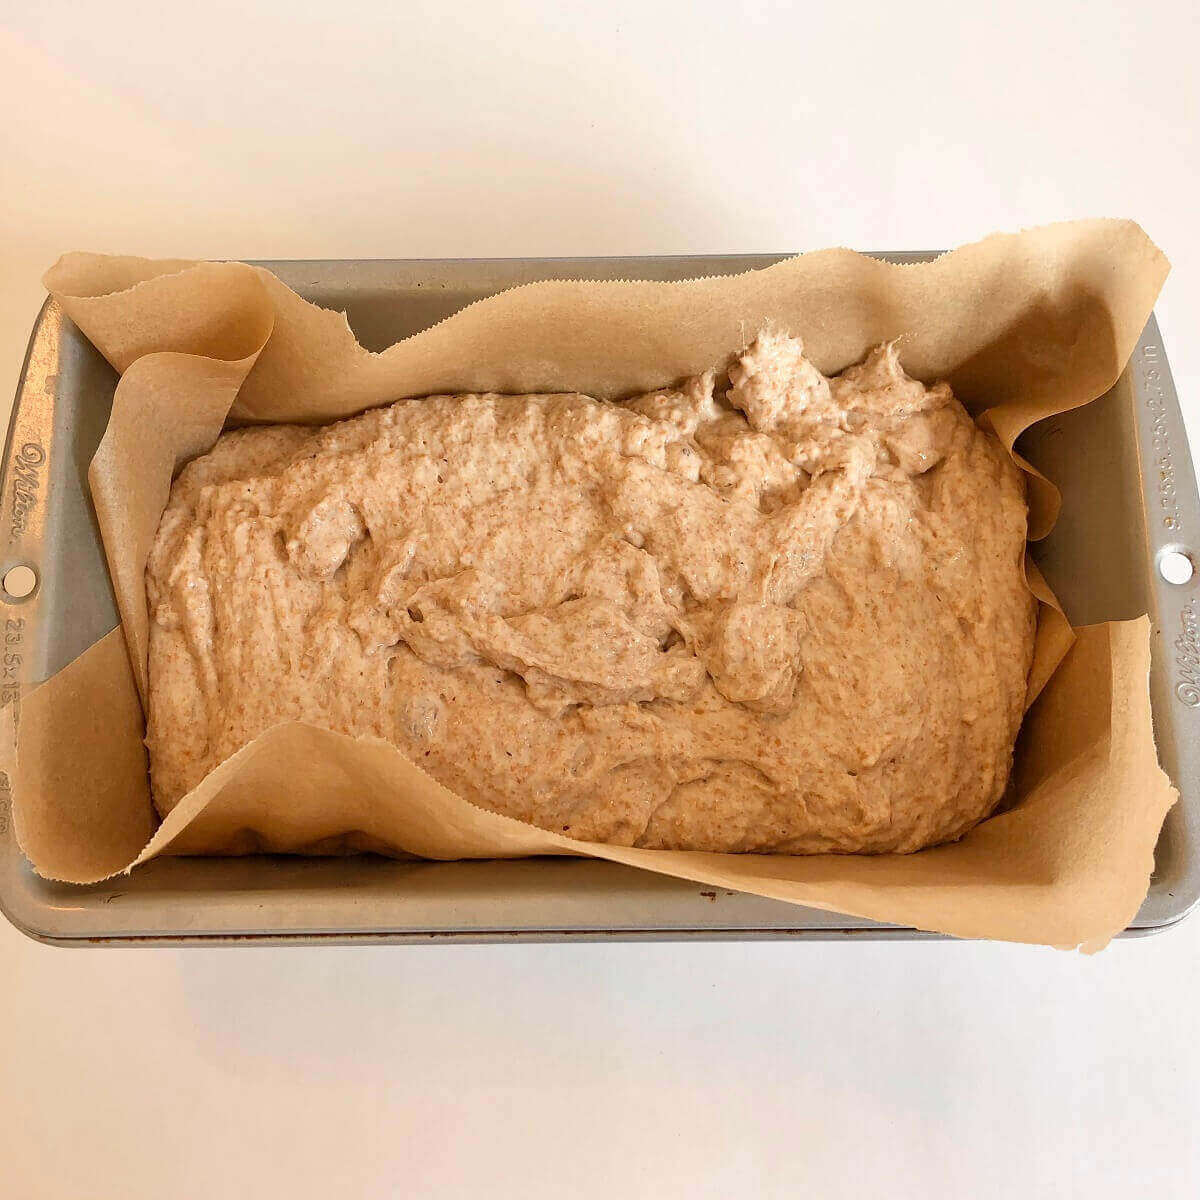 Raw bread dough in a loaf pan.